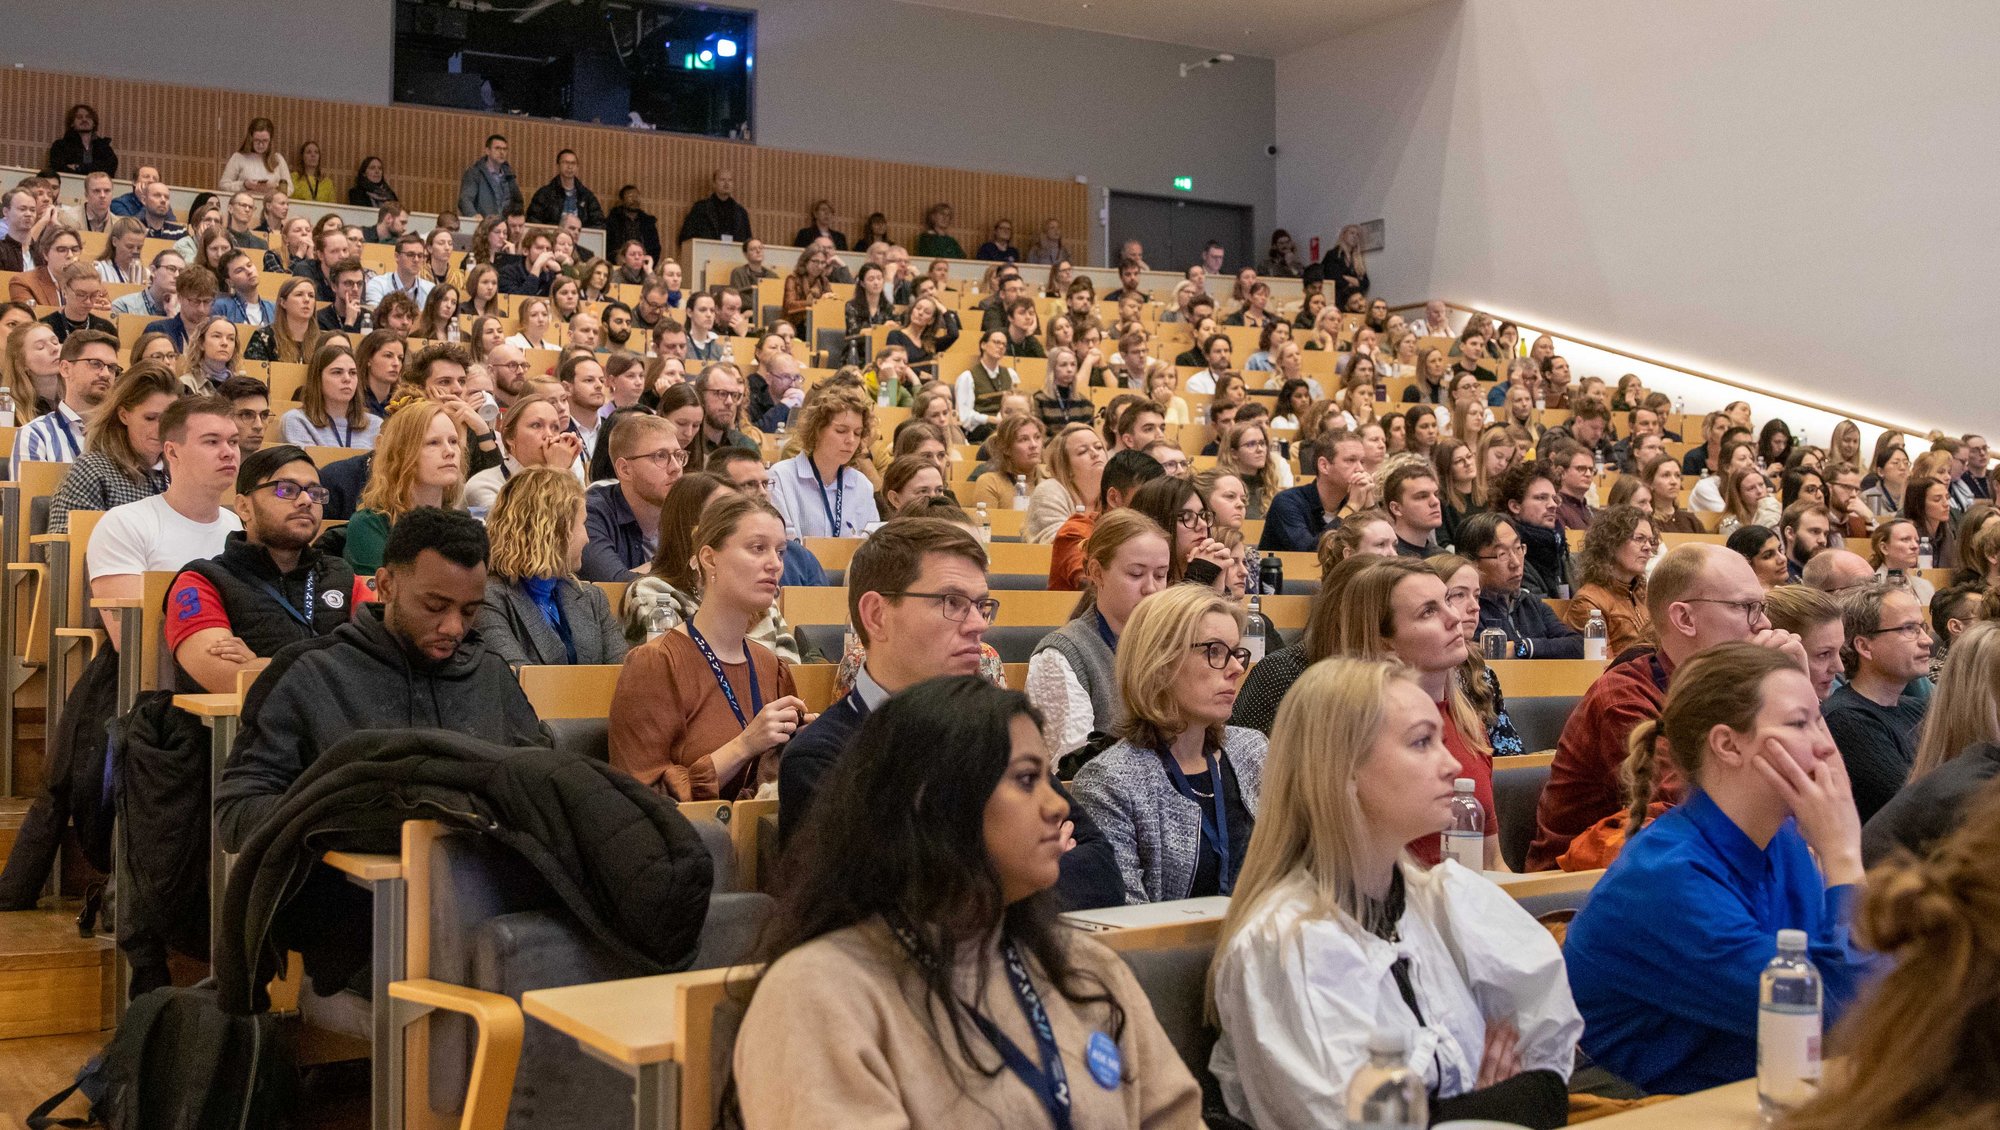 Several hundreds of PhD Students showed up at The Per Kirkeby Auditorium. Photo: Simon Fischel, AU Health.